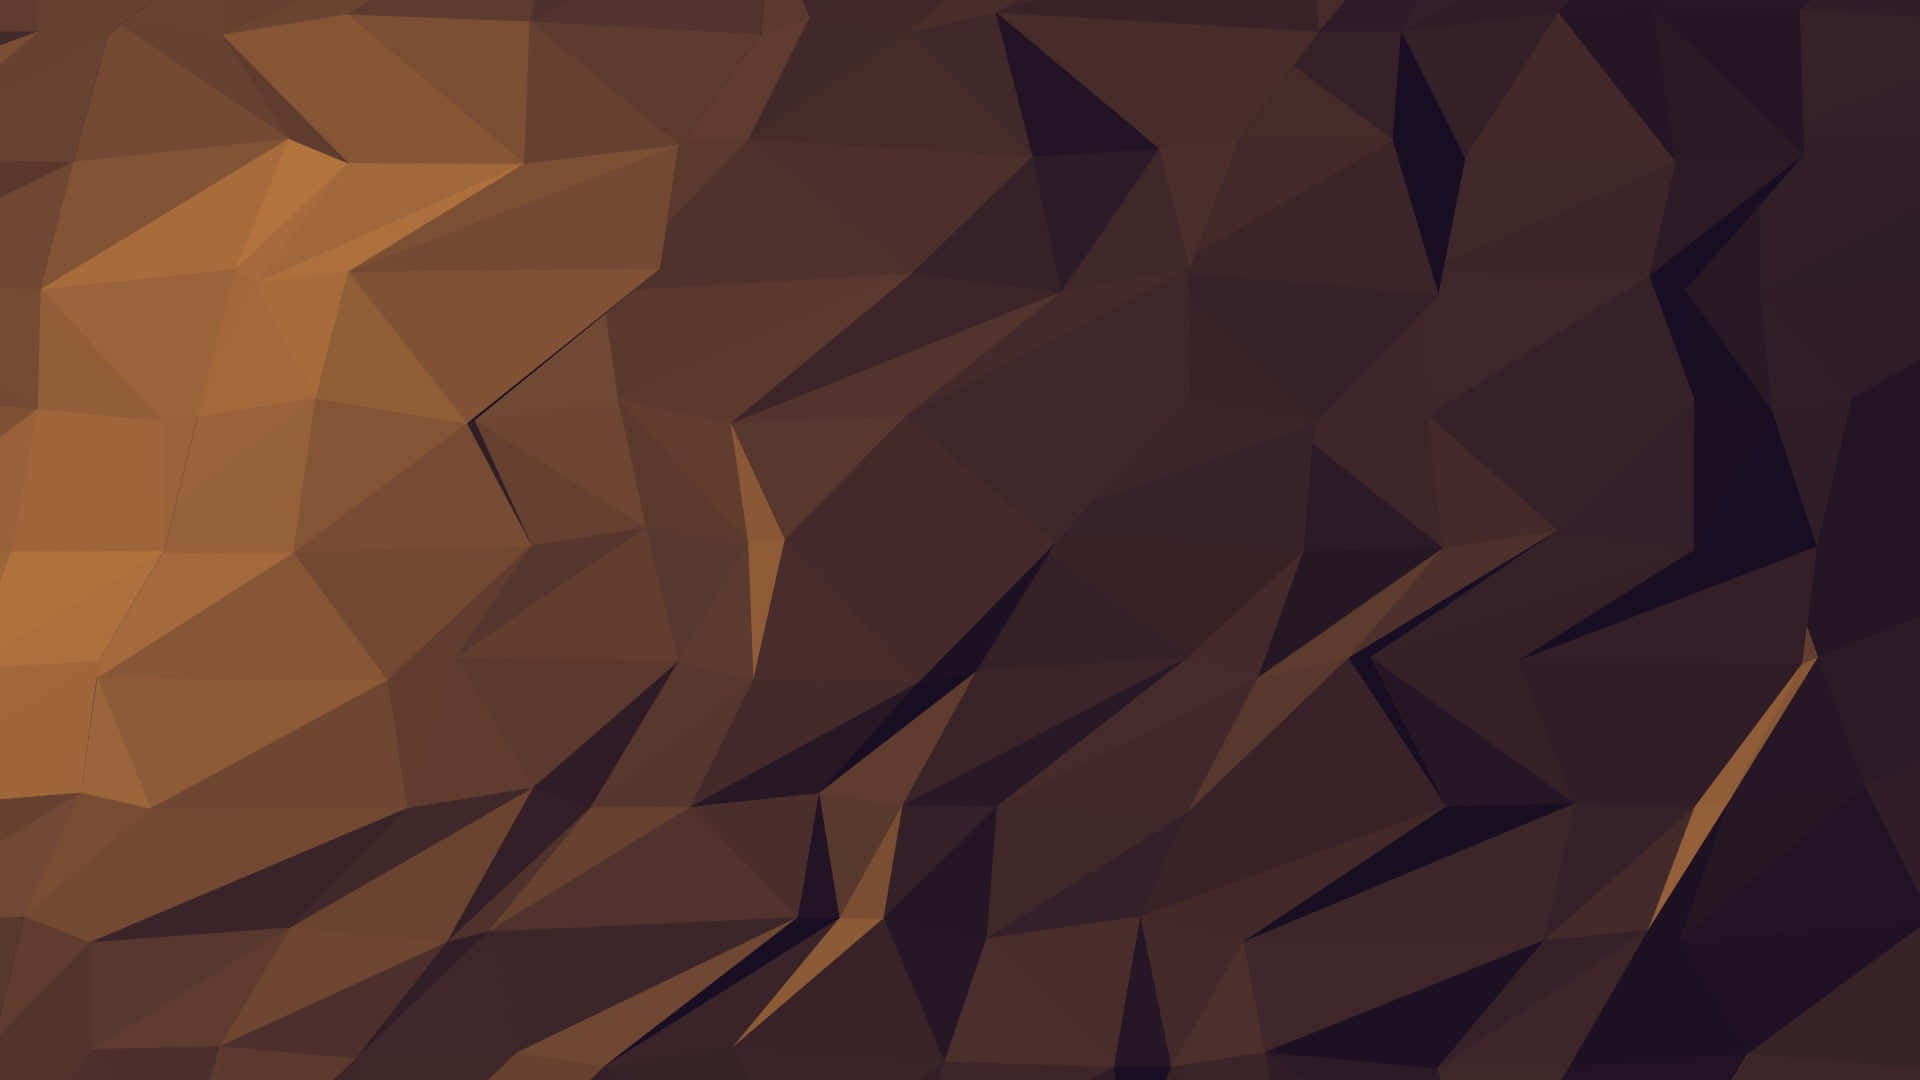 Graphic low poly art in modern colors